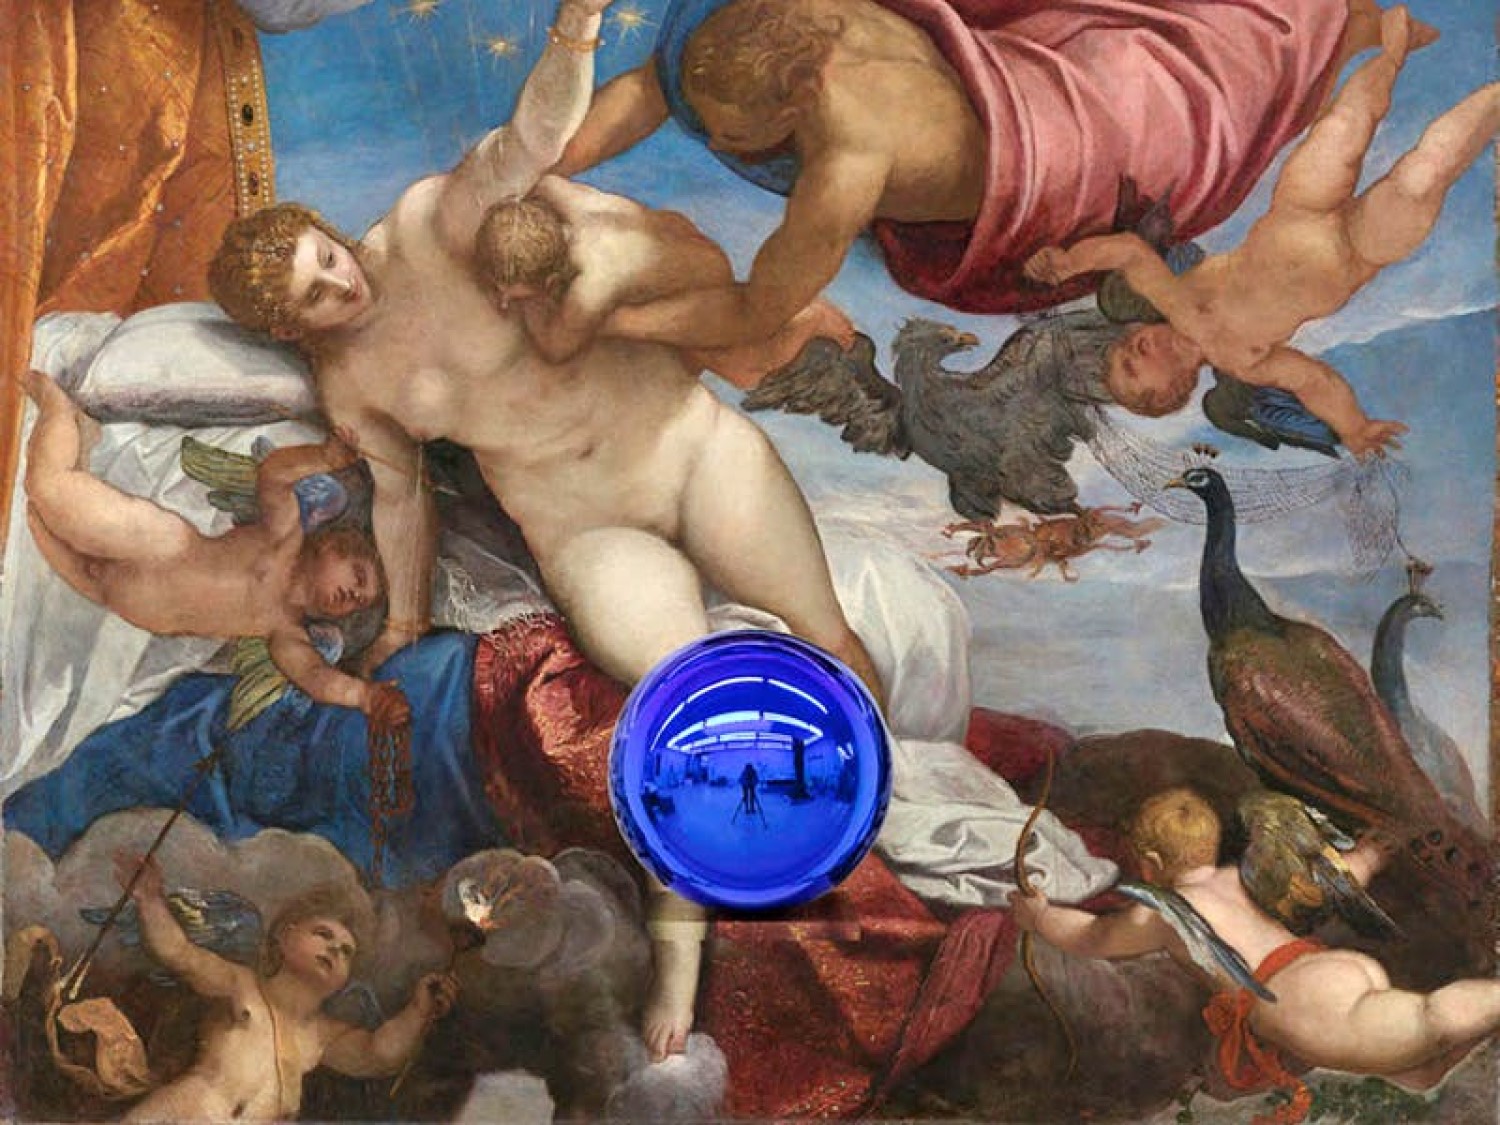 Gazing Ball (Tintoretto The Origin of the Milky Way) (2016), Jeff Koons. Â© Jeff Koons - Courtesy of the artist and Almine Rech Gallery